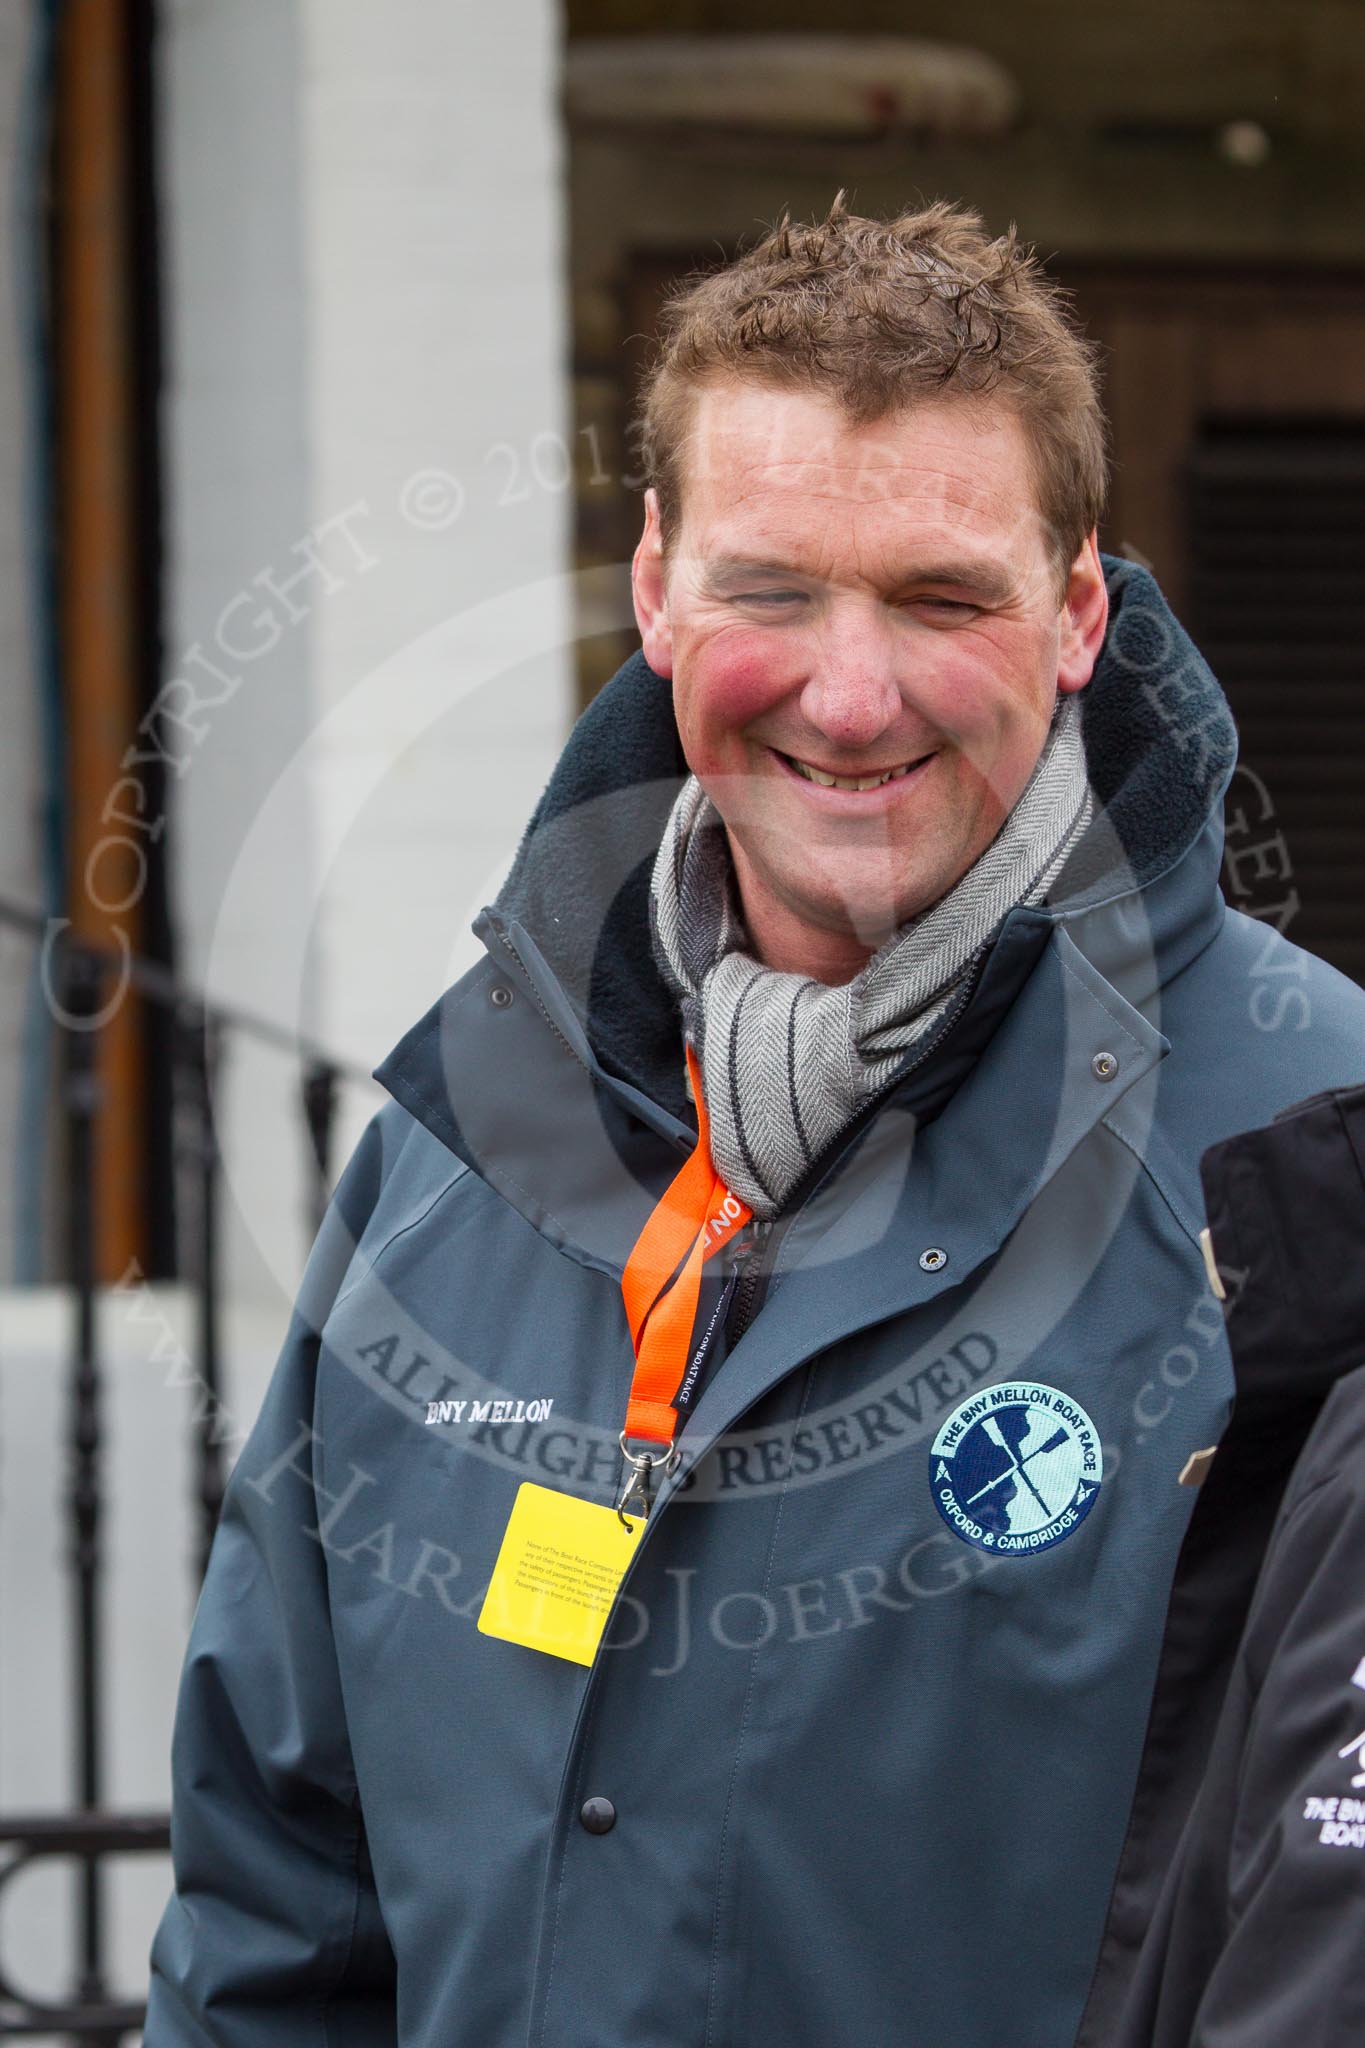 The Boat Race 2013: Sir Matthew Pinsent, umpire for the 2013 Boat Race Blue Boat race, hours before the start of the event..
Putney,
London SW15,

United Kingdom,
on 31 March 2013 at 12:52, image #55